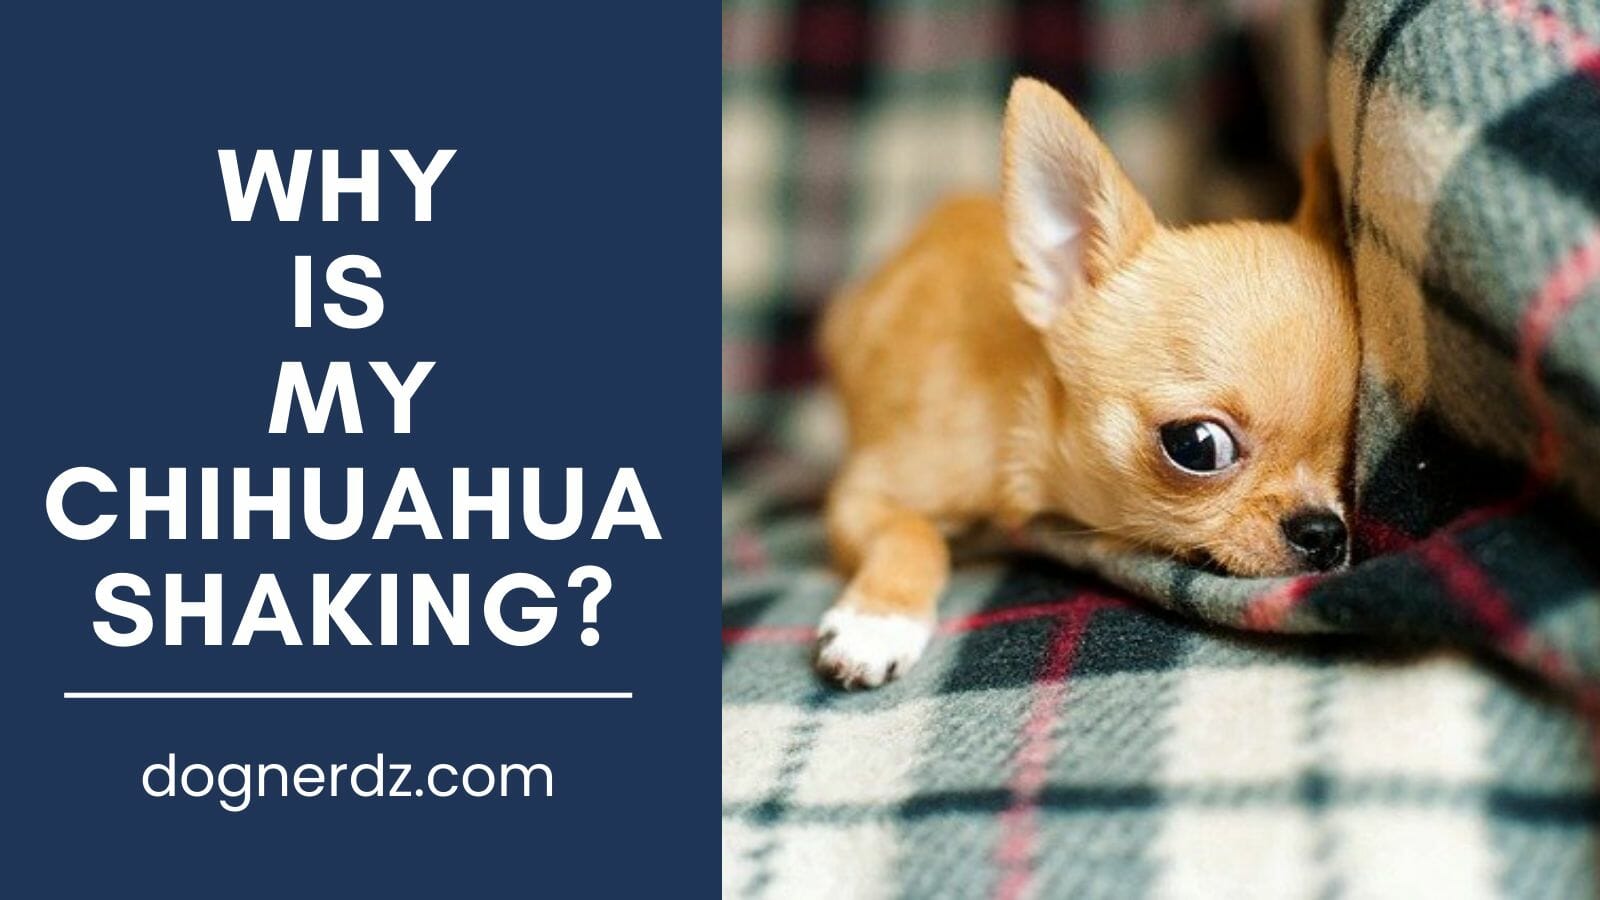 Why Is My Chihuahua Shaking?